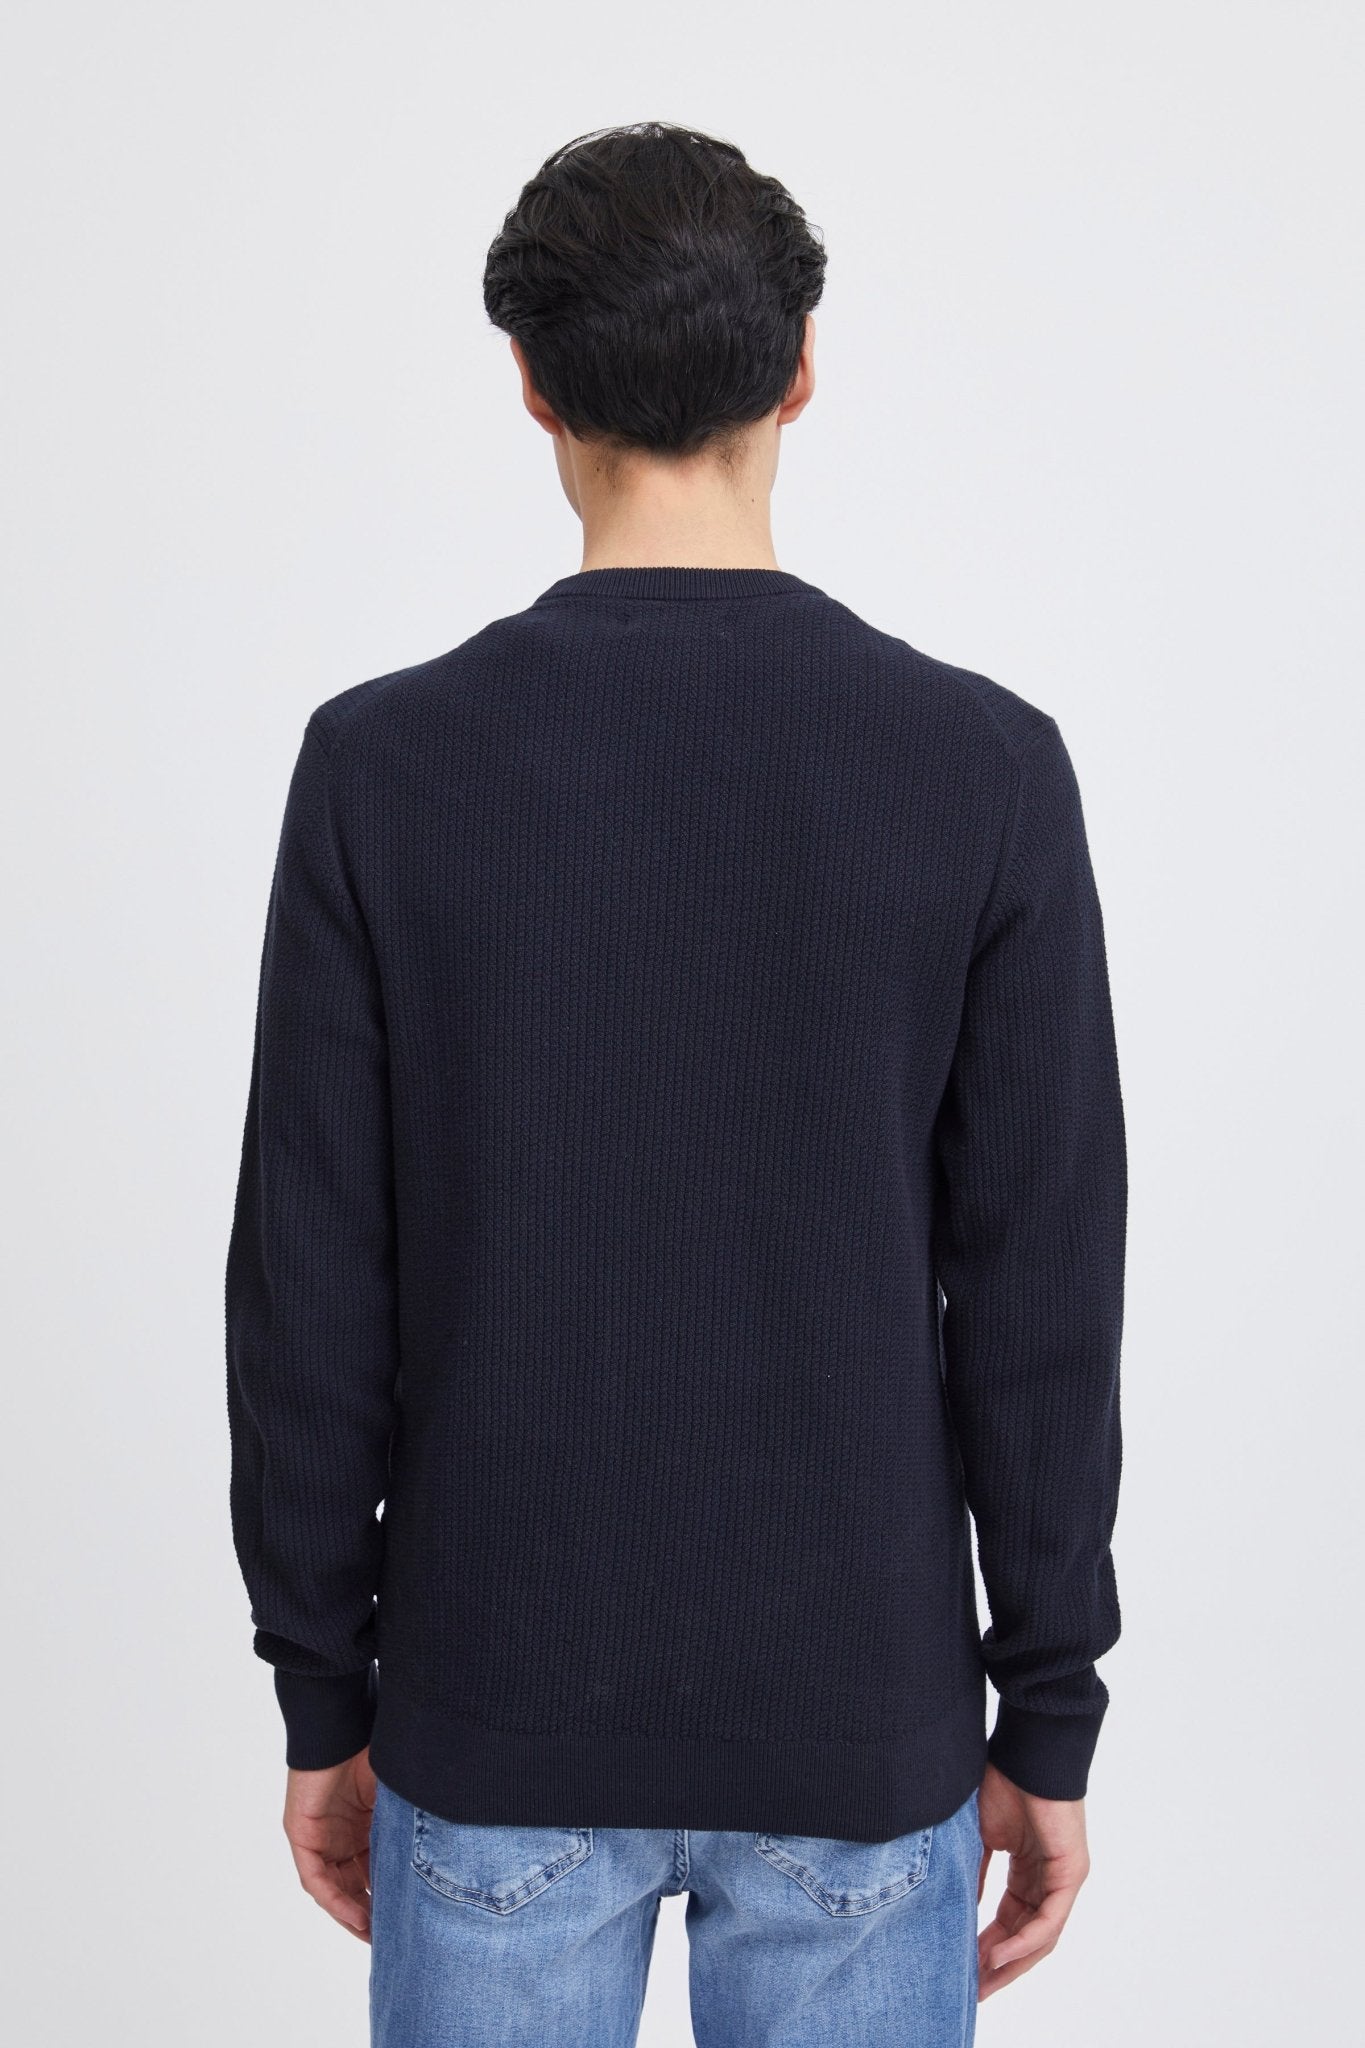 CASUAL FRIDAY - CFKARL structured crew neck knit - 20505088 - Boutique Bubbles